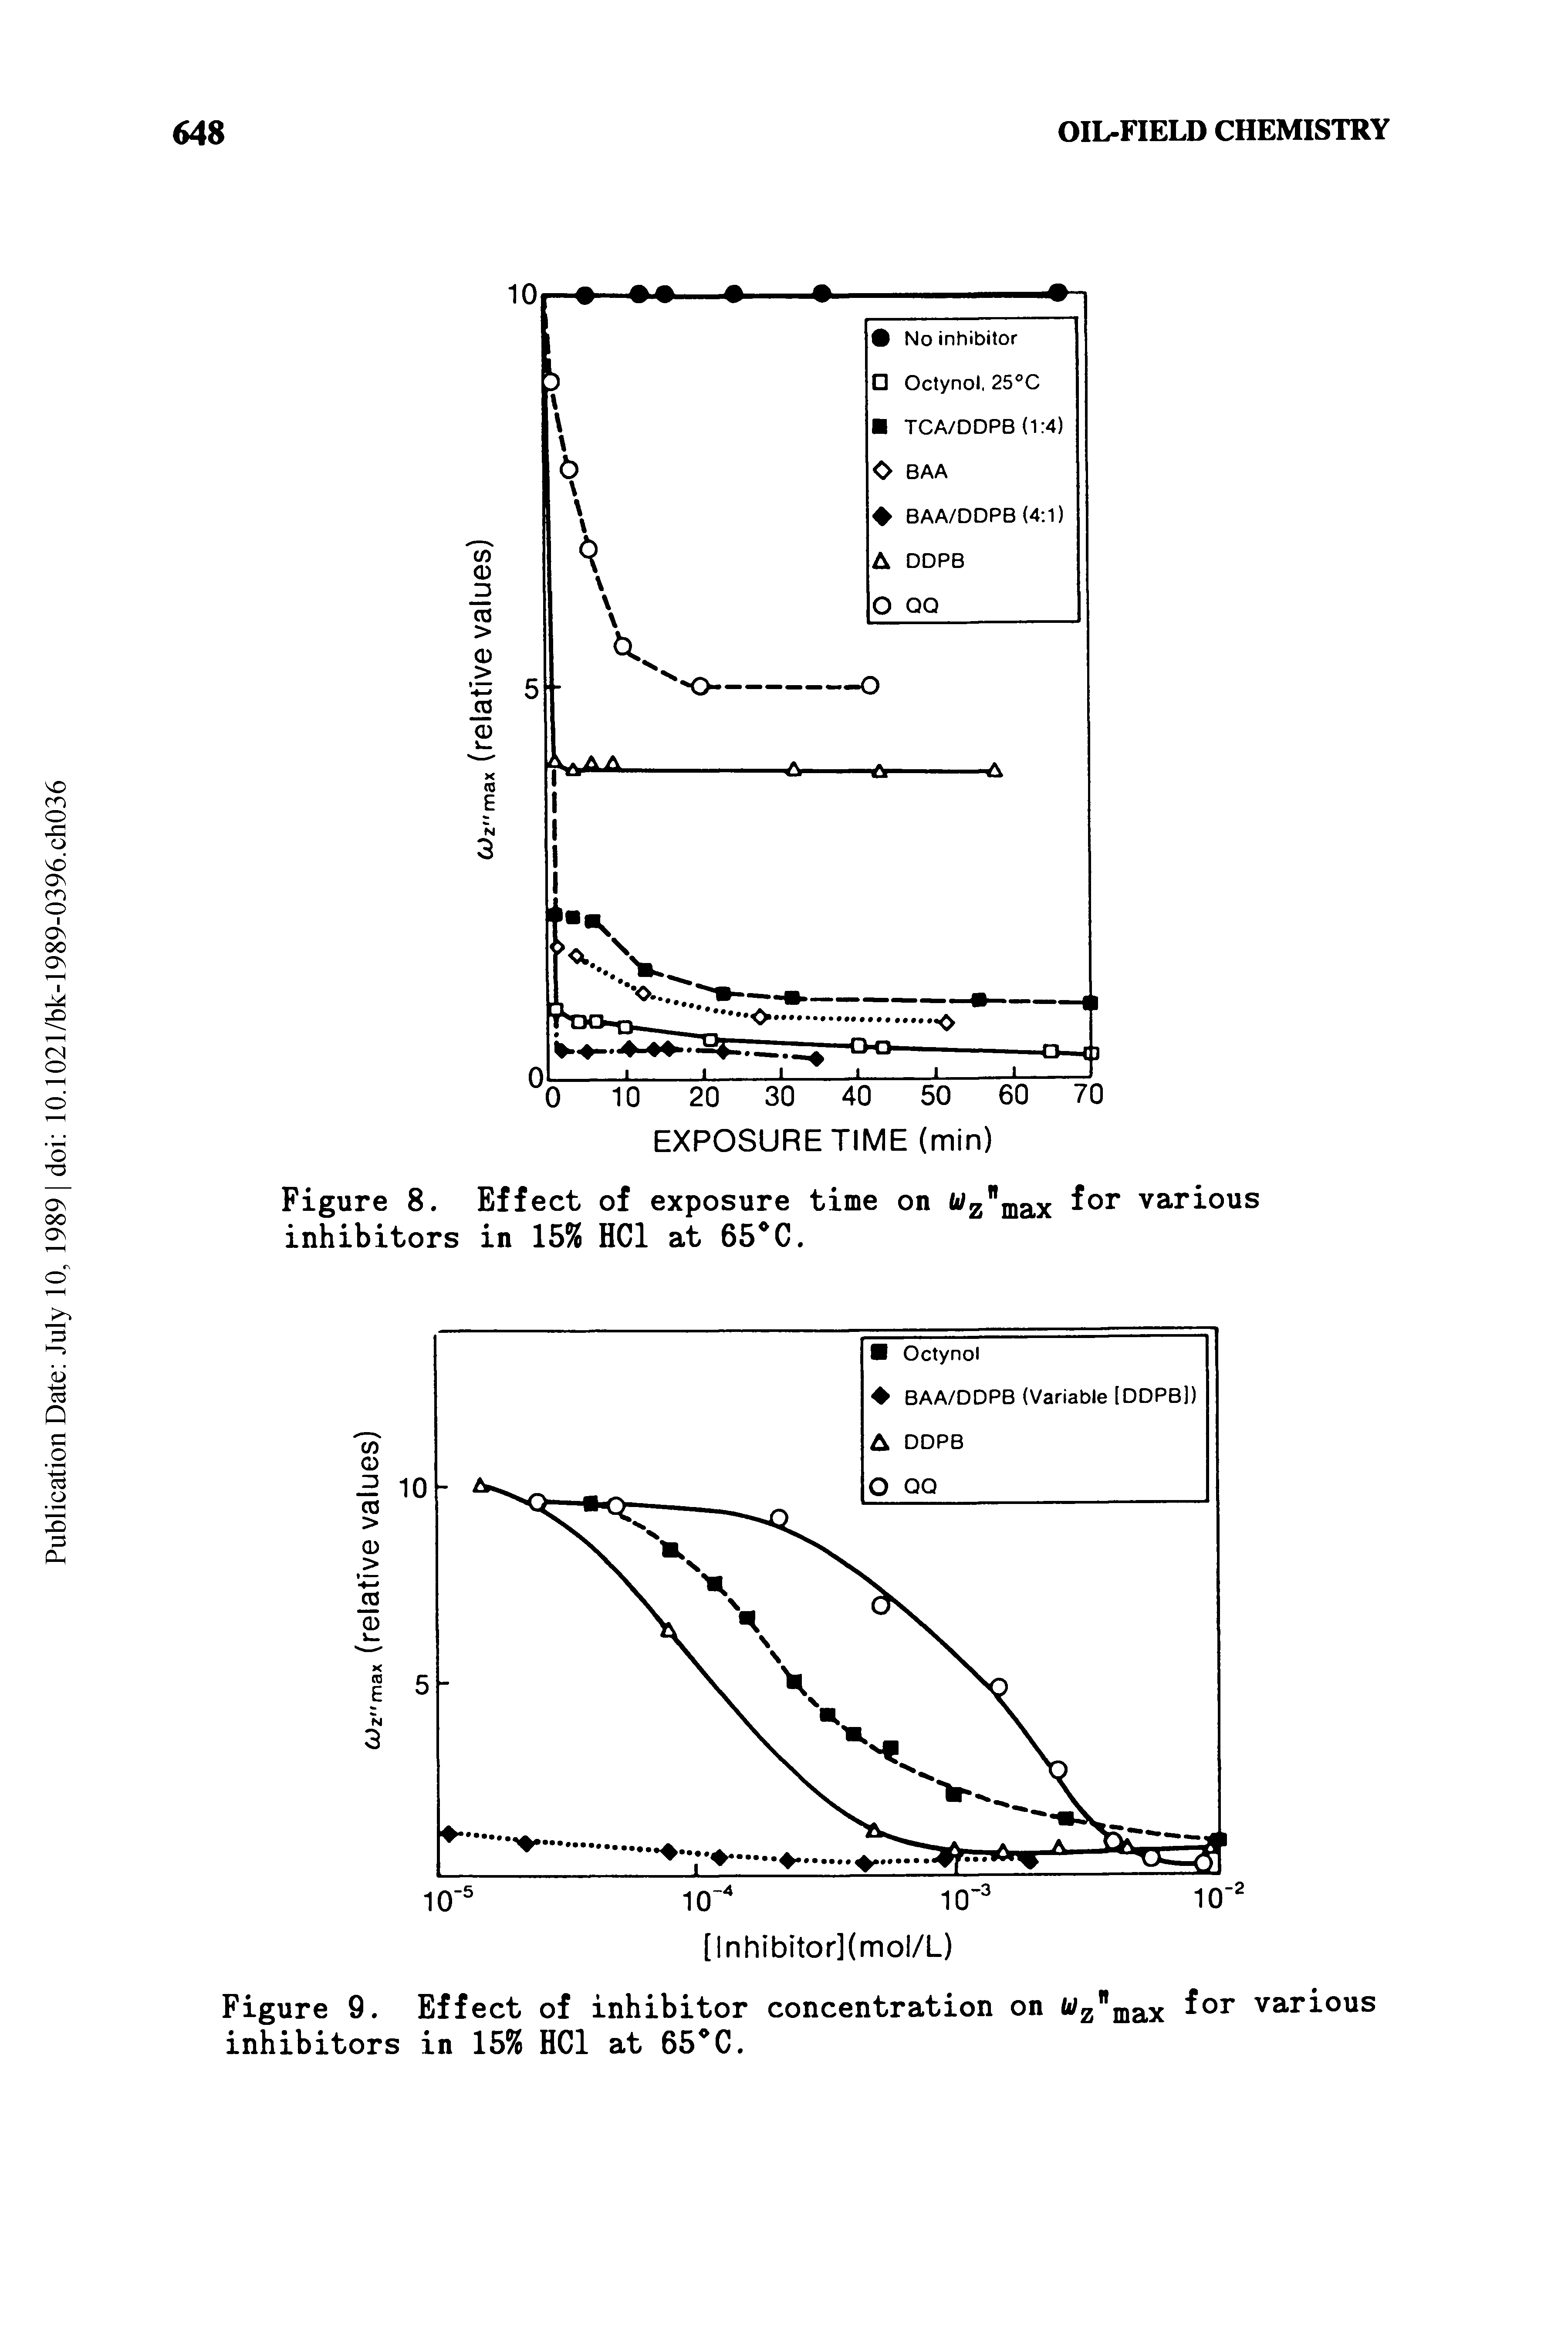 Figure 9. Effect of inhibitor concentration on wznmax f°r various inhibitors in 15% HC1 at 65 C.